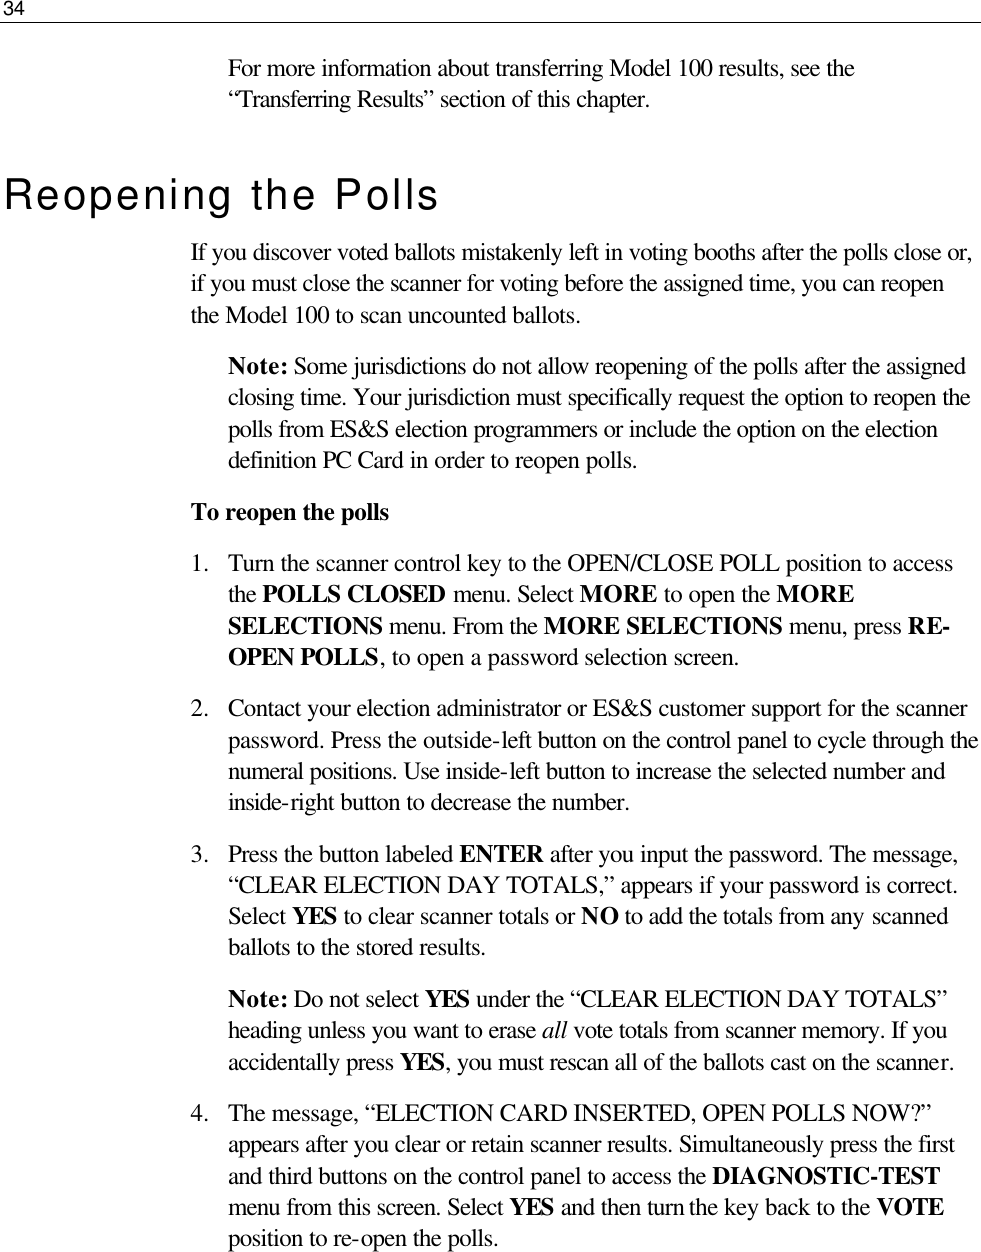 34  For more information about transferring Model 100 results, see the “Transferring Results” section of this chapter. Reopening the Polls If you discover voted ballots mistakenly left in voting booths after the polls close or, if you must close the scanner for voting before the assigned time, you can reopen the Model 100 to scan uncounted ballots. Note: Some jurisdictions do not allow reopening of the polls after the assigned closing time. Your jurisdiction must specifically request the option to reopen the polls from ES&amp;S election programmers or include the option on the election definition PC Card in order to reopen polls. To reopen the polls 1.  Turn the scanner control key to the OPEN/CLOSE POLL position to access the POLLS CLOSED menu. Select MORE to open the MORE SELECTIONS menu. From the MORE SELECTIONS menu, press RE-OPEN POLLS, to open a password selection screen. 2.  Contact your election administrator or ES&amp;S customer support for the scanner password. Press the outside-left button on the control panel to cycle through the numeral positions. Use inside-left button to increase the selected number and inside-right button to decrease the number. 3.  Press the button labeled ENTER after you input the password. The message, “CLEAR ELECTION DAY TOTALS,” appears if your password is correct. Select YES to clear scanner totals or NO to add the totals from any scanned ballots to the stored results.  Note: Do not select YES under the “CLEAR ELECTION DAY TOTALS” heading unless you want to erase all vote totals from scanner memory. If you accidentally press YES, you must rescan all of the ballots cast on the scanner. 4.  The message, “ELECTION CARD INSERTED, OPEN POLLS NOW?” appears after you clear or retain scanner results. Simultaneously press the first and third buttons on the control panel to access the DIAGNOSTIC-TEST menu from this screen. Select YES and then turn the key back to the VOTE position to re-open the polls.    